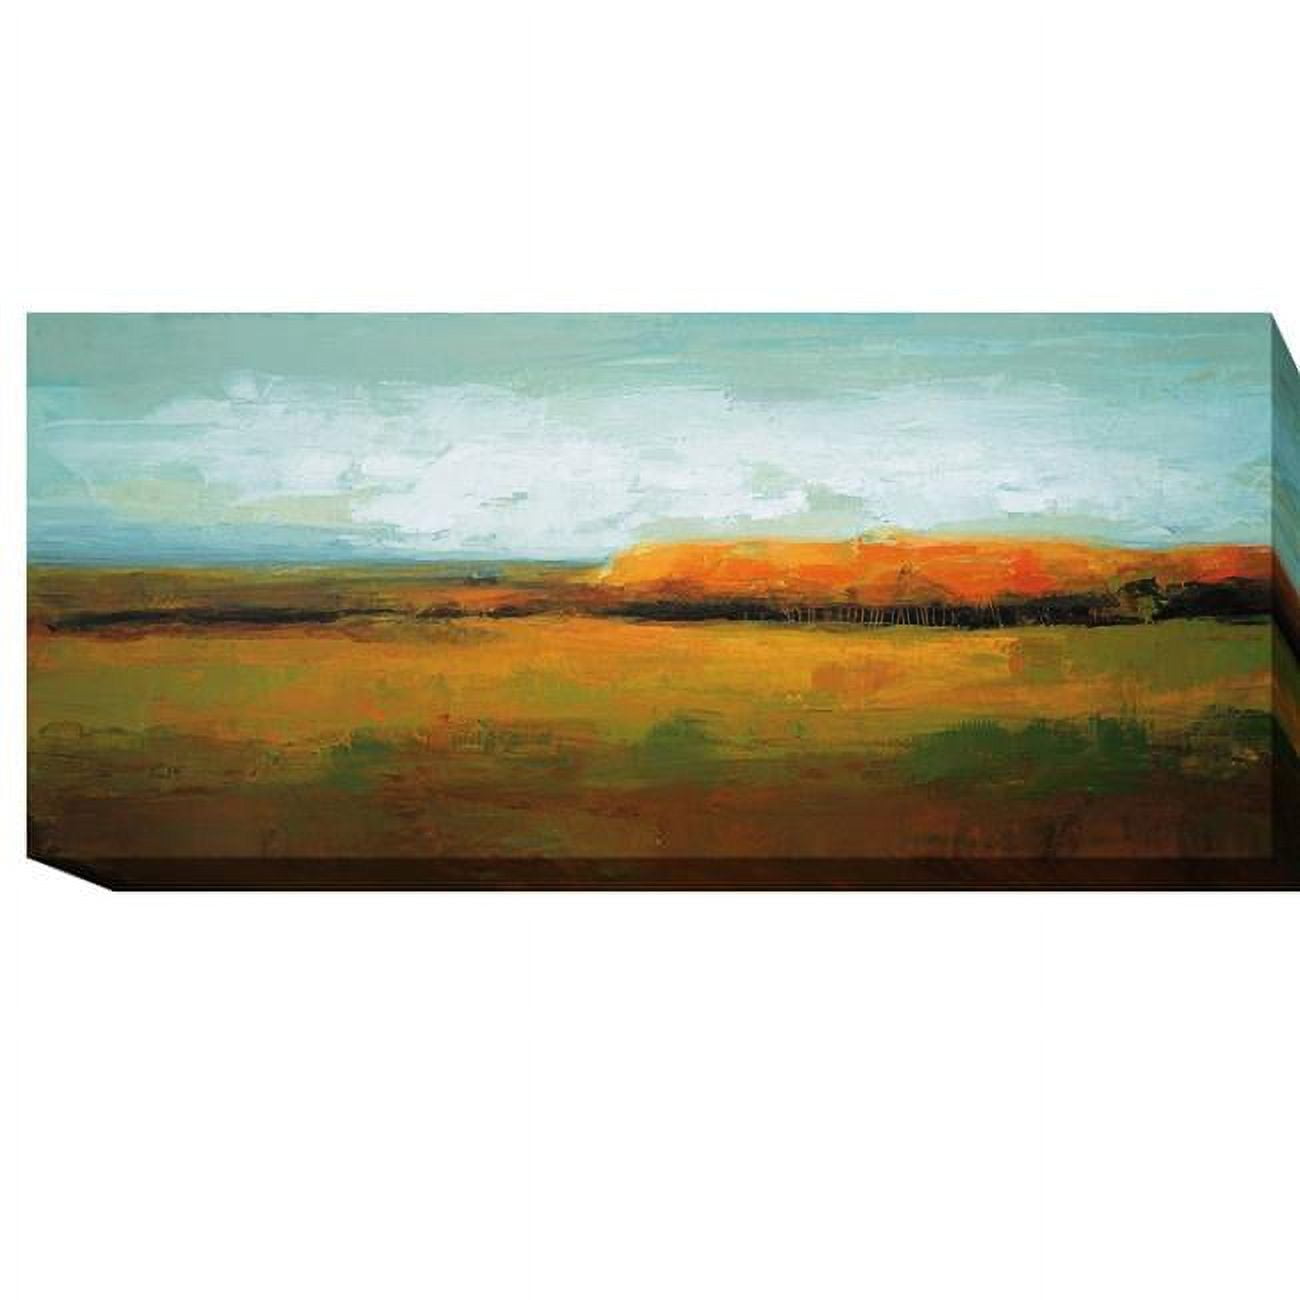 Drivescape By Peter Colbert Premium Gallery-wrapped Canvas Giclee Art - 16 X 32 X 1.5 In.